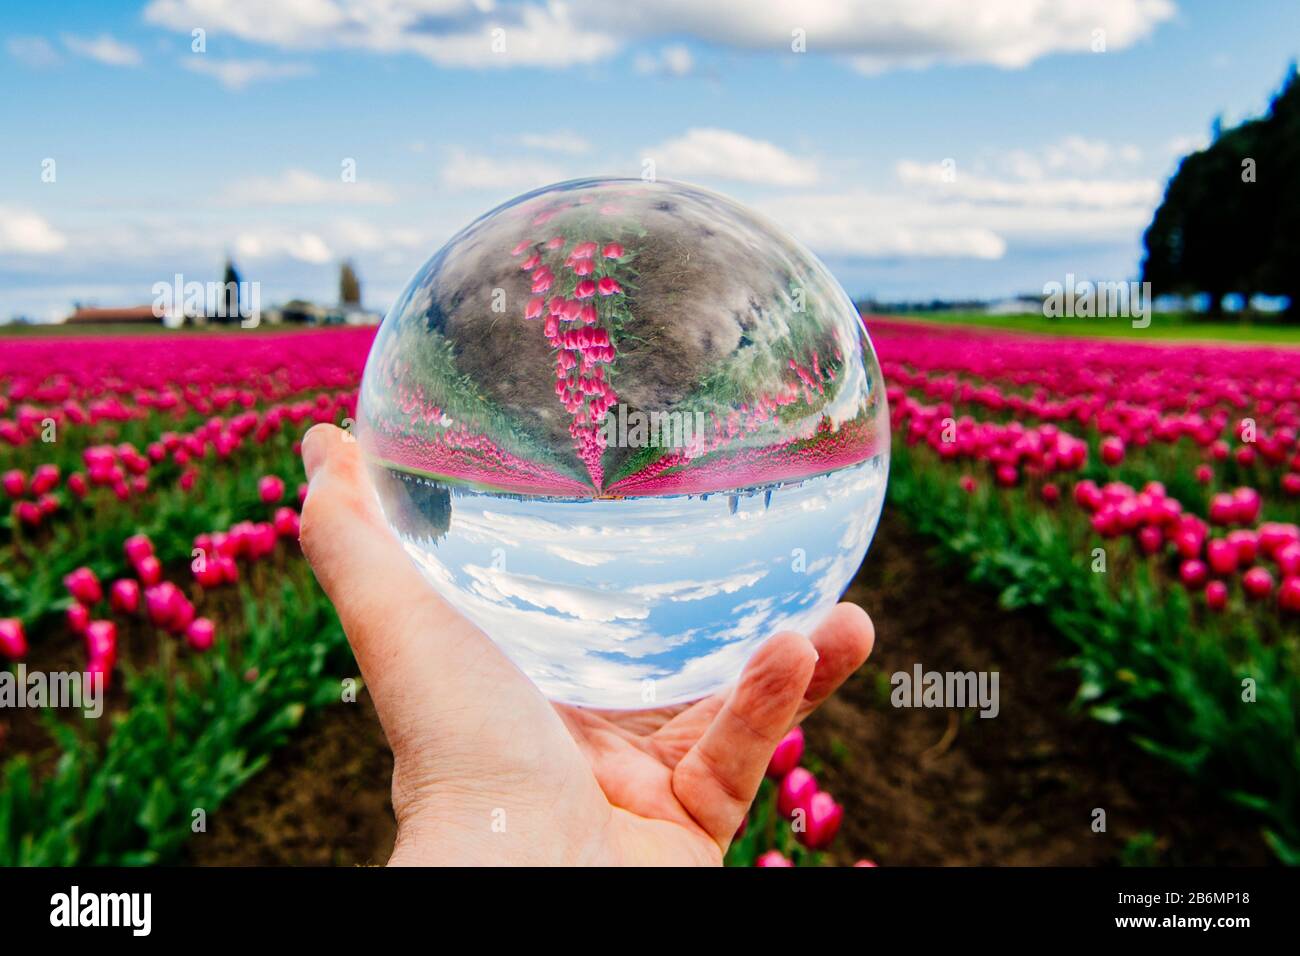 Person holding glass ball with flowers reflection, Skagit Valley, Washington, USA Stock Photo